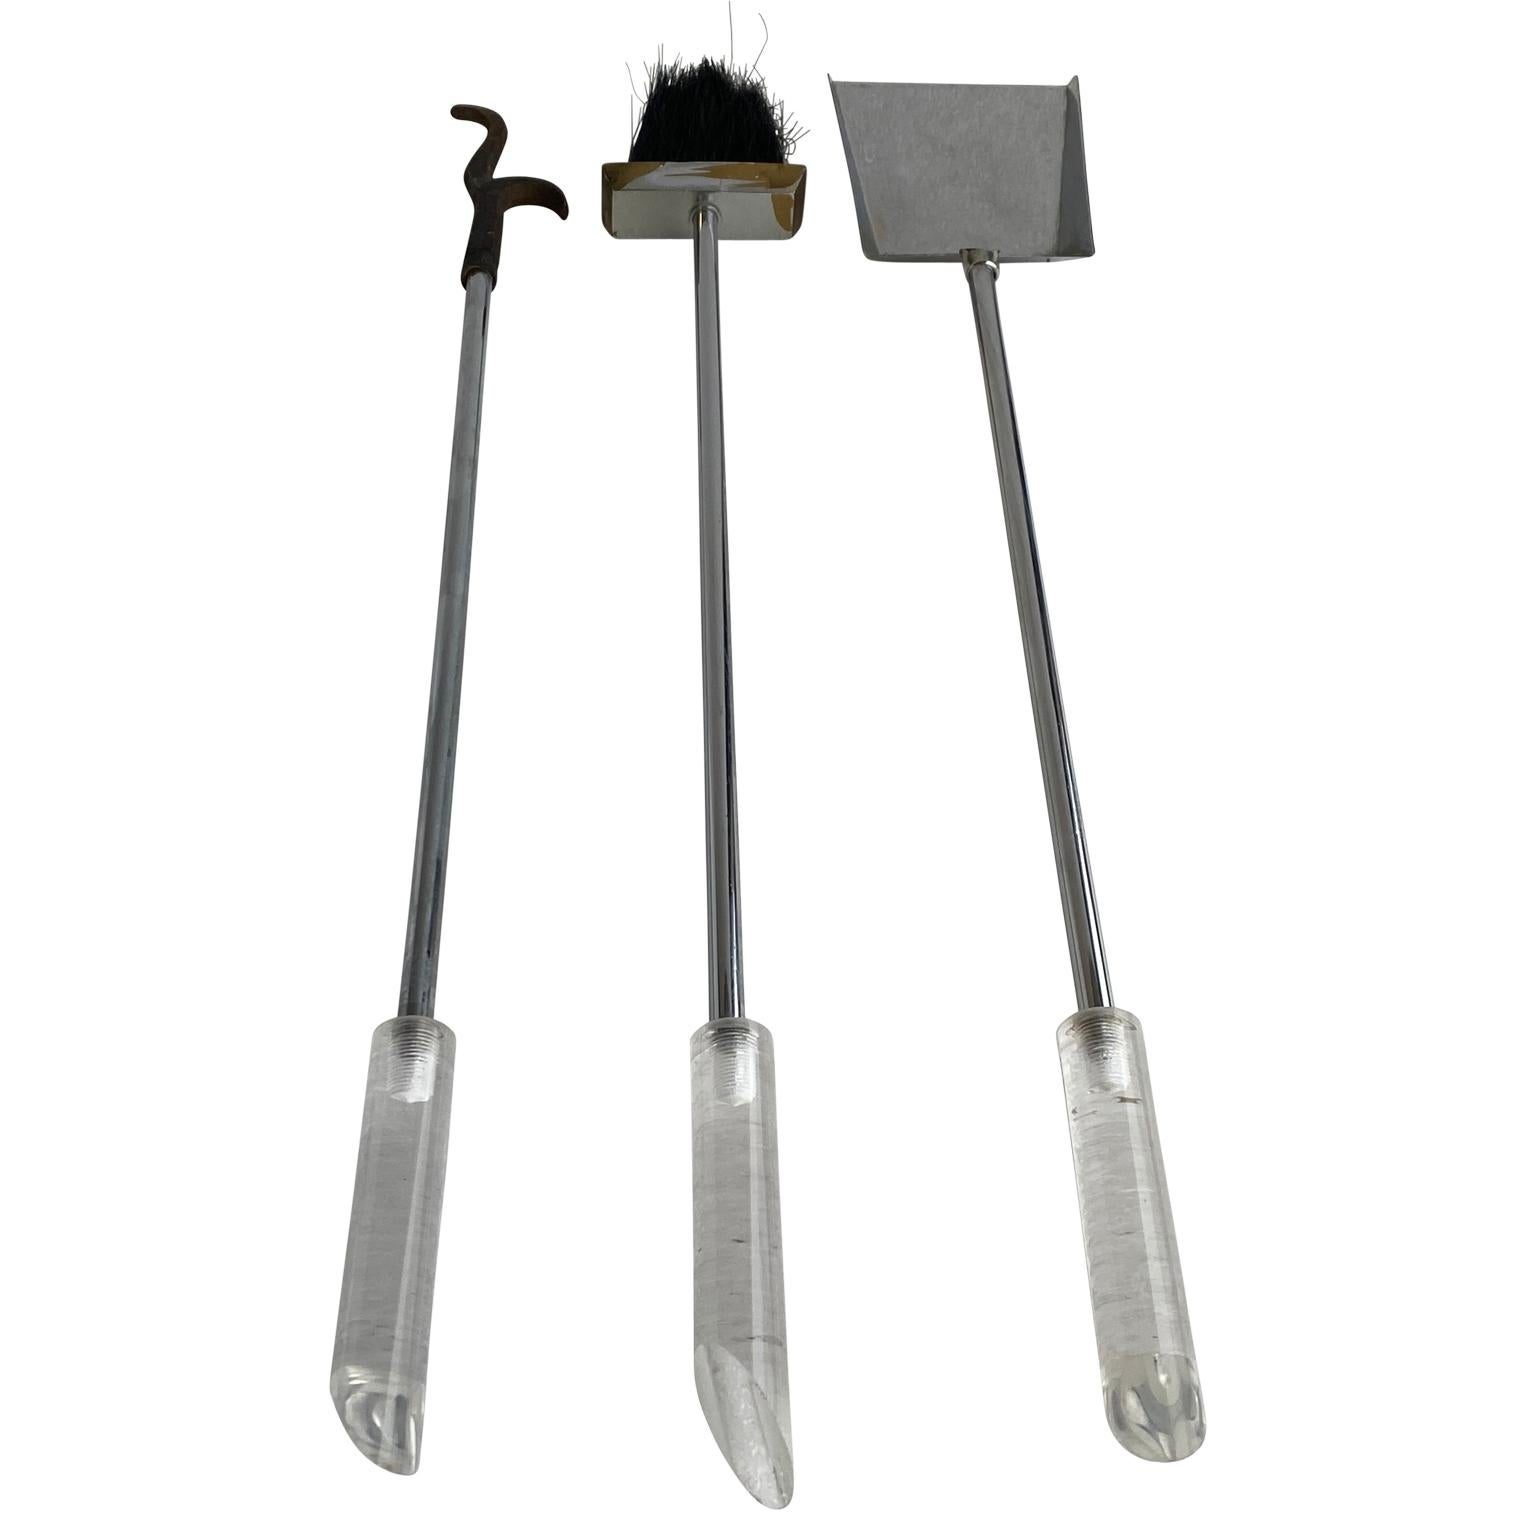 Set of Mid-Century Modern Lucite and chrome fireplace tools.
This modern set of fireplace tools has a polished chrome base and a center stalk with polished lucite tool handles. In vintage condition, this set is a wonderful addition to any modern